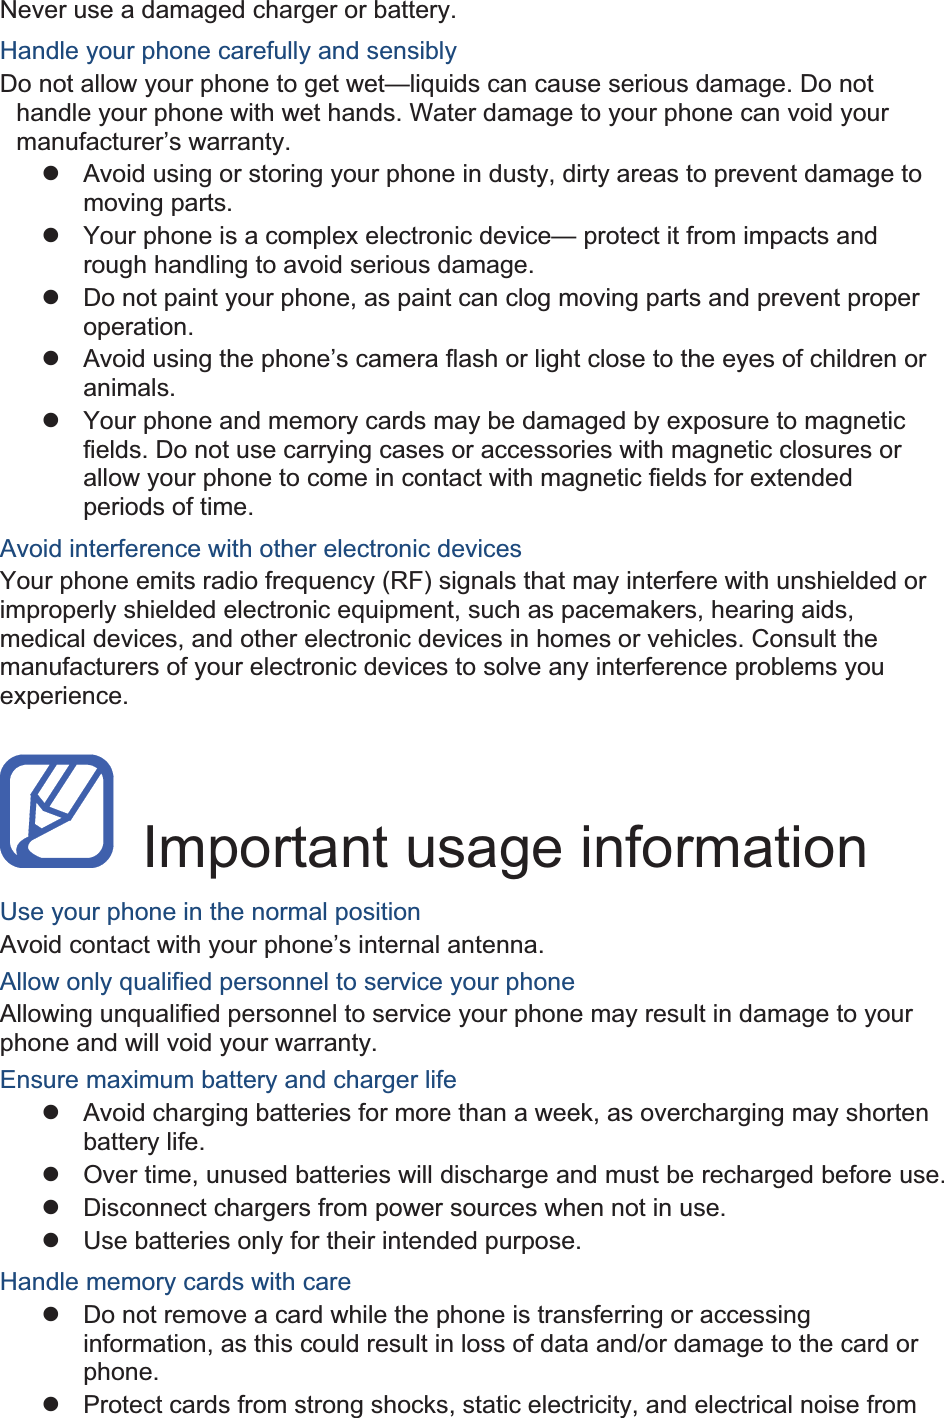 Never use a damaged charger or battery. Handle your phone carefully and sensibly Do not allow your phone to get wet—liquids can cause serious damage. Do not handle your phone with wet hands. Water damage to your phone can void your manufacturer’s warranty. z  Avoid using or storing your phone in dusty, dirty areas to prevent damage to moving parts. z  Your phone is a complex electronic device— protect it from impacts and rough handling to avoid serious damage. z  Do not paint your phone, as paint can clog moving parts and prevent proper operation. z  Avoid using the phone’s camera flash or light close to the eyes of children or animals. z  Your phone and memory cards may be damaged by exposure to magnetic fields. Do not use carrying cases or accessories with magnetic closures or allow your phone to come in contact with magnetic fields for extended periods of time. Avoid interference with other electronic devices Your phone emits radio frequency (RF) signals that may interfere with unshielded or improperly shielded electronic equipment, such as pacemakers, hearing aids, medical devices, and other electronic devices in homes or vehicles. Consult the manufacturers of your electronic devices to solve any interference problems you experience.  Important usage information Use your phone in the normal position Avoid contact with your phone’s internal antenna. Allow only qualified personnel to service your phone Allowing unqualified personnel to service your phone may result in damage to your phone and will void your warranty. Ensure maximum battery and charger life z  Avoid charging batteries for more than a week, as overcharging may shorten battery life. z  Over time, unused batteries will discharge and must be recharged before use. z  Disconnect chargers from power sources when not in use. z  Use batteries only for their intended purpose. Handle memory cards with care z  Do not remove a card while the phone is transferring or accessing information, as this could result in loss of data and/or damage to the card or phone. z  Protect cards from strong shocks, static electricity, and electrical noise from 